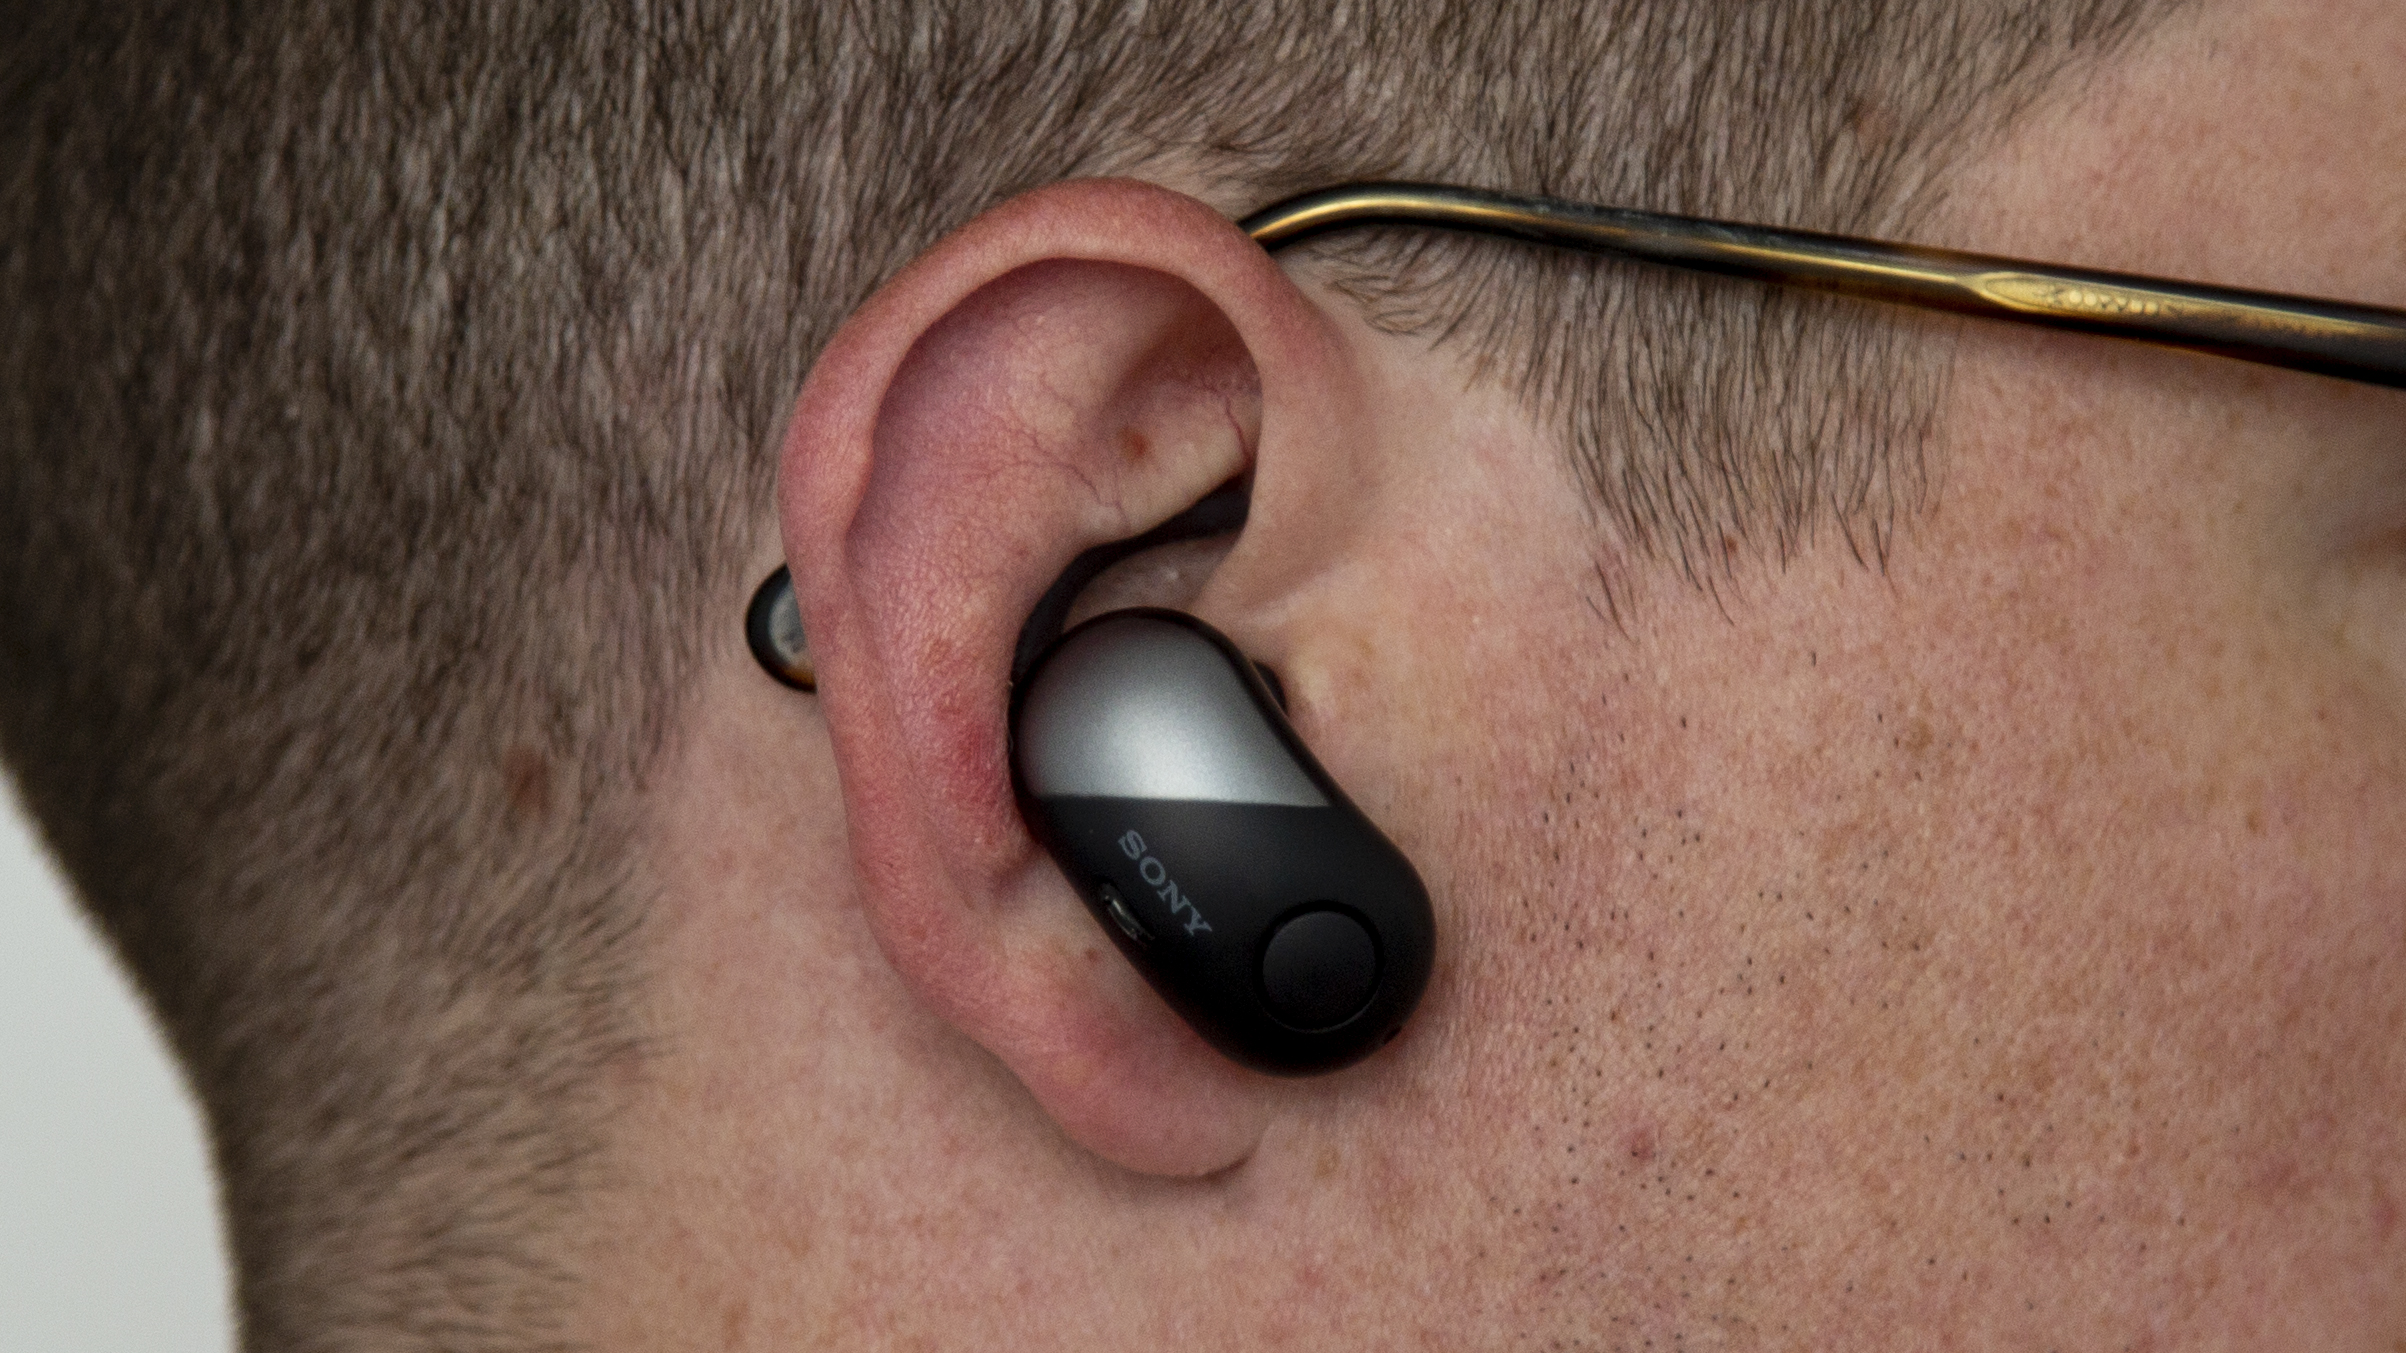 I’d Love Sony’s New Truly Wireless Earbuds If The Battery Didn’t Suck